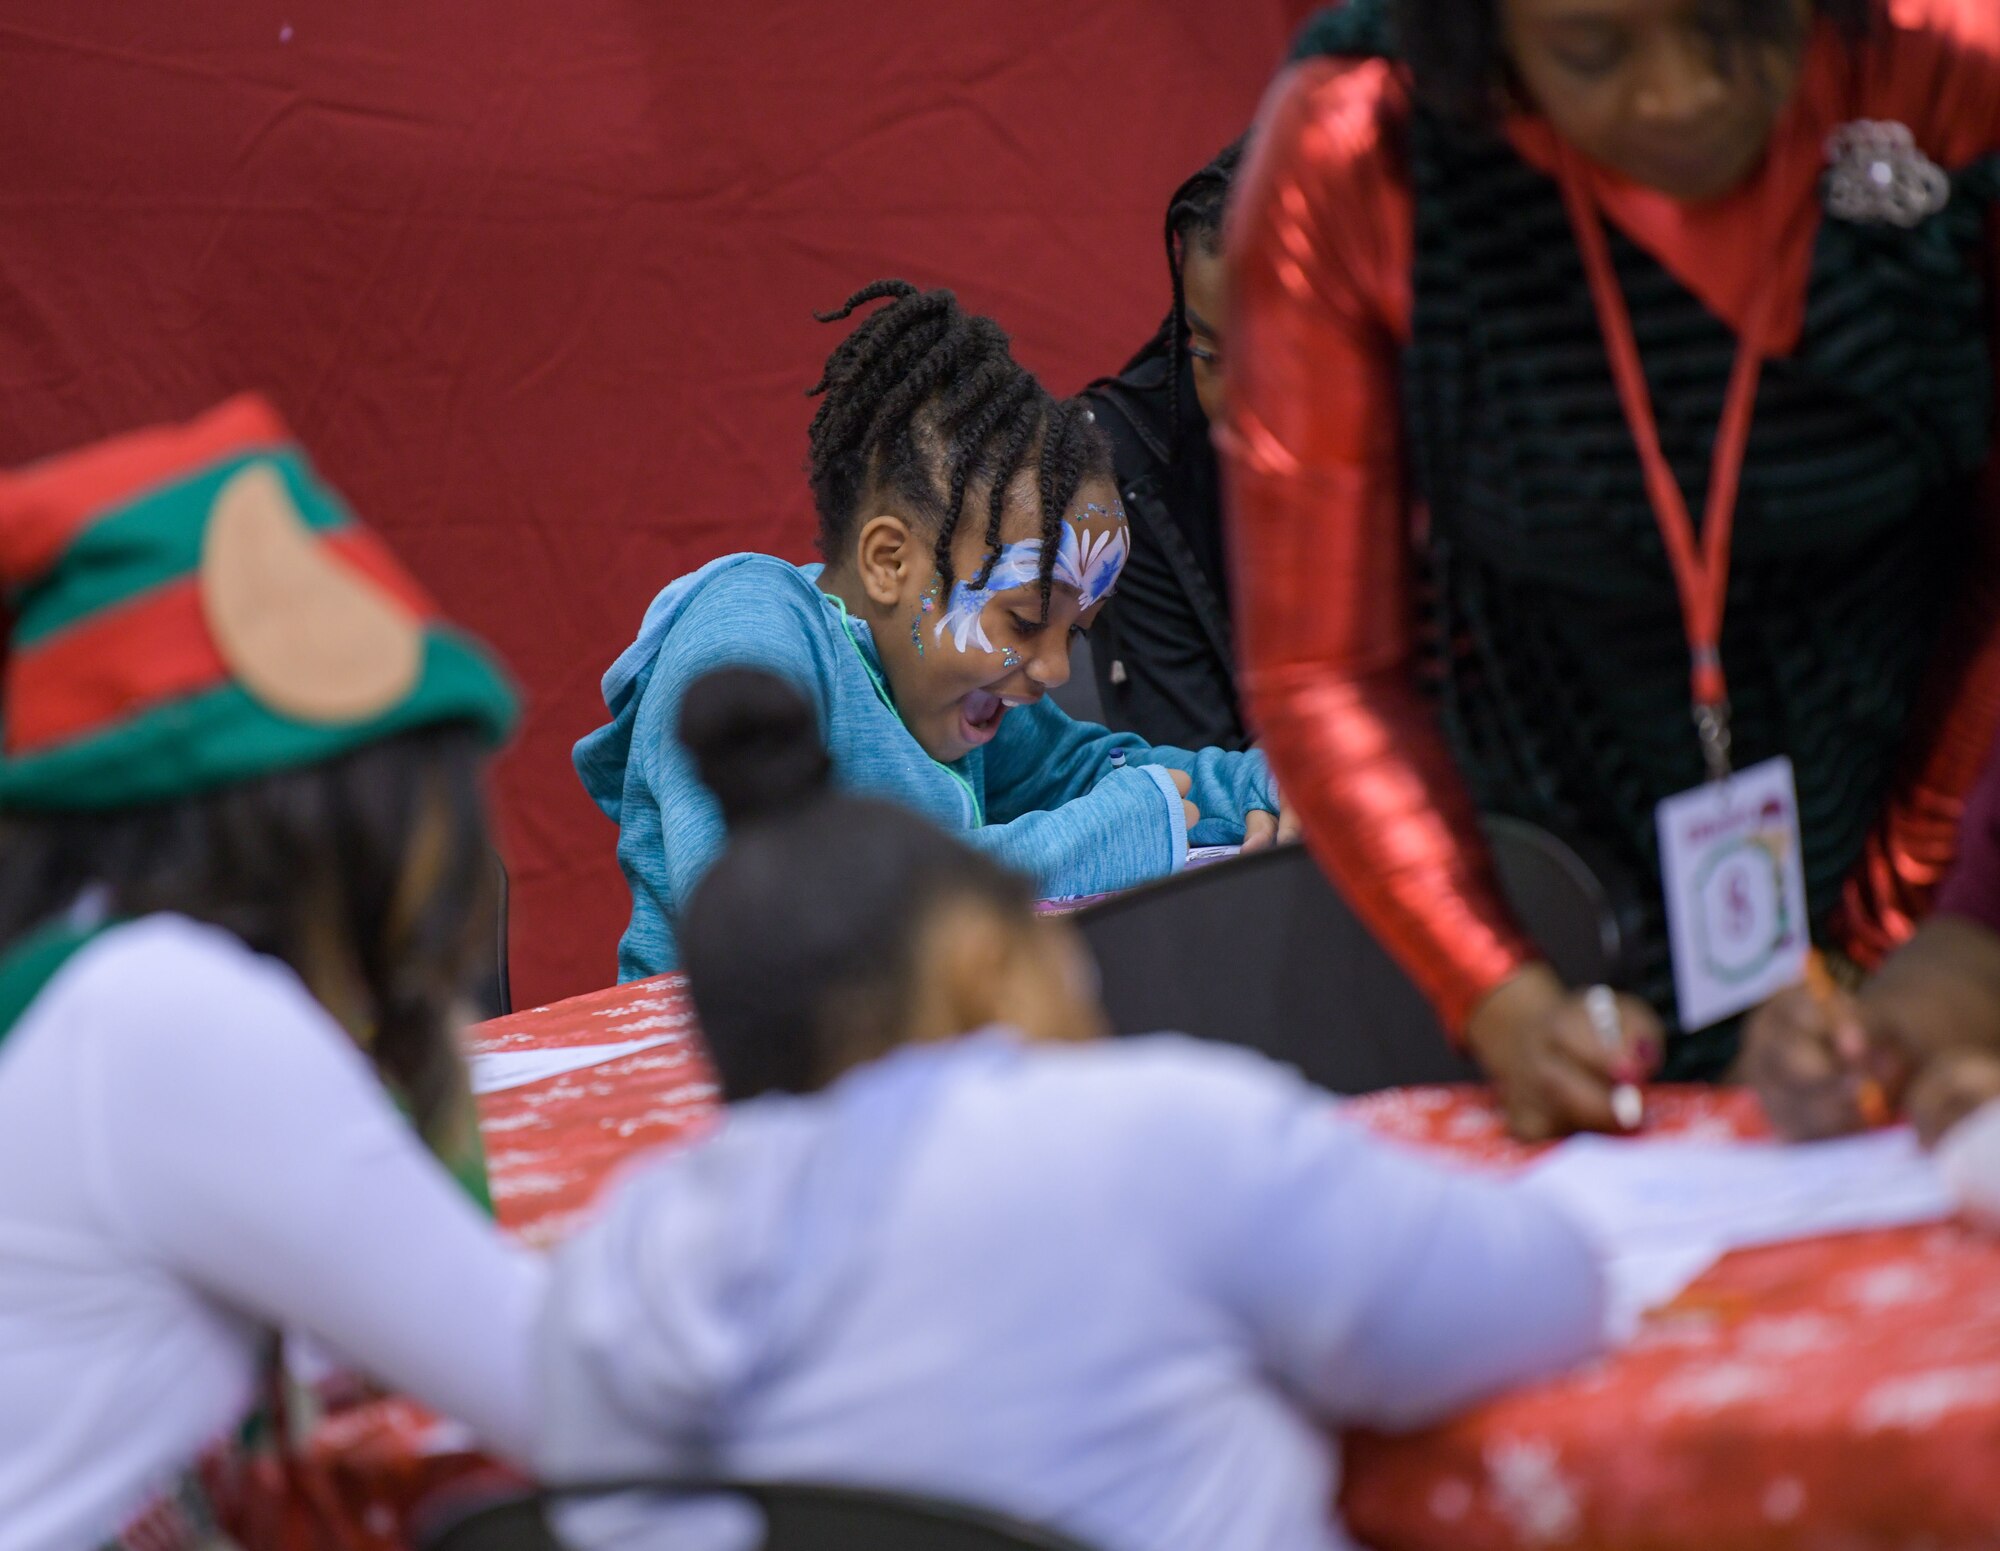 A Salvation Army Angel Tree Child takes part in the coloring station at Flight to the North Pole, an annual partnership between the 172nd Airlift Wing, Jackson, Mississippi, the Jackson, Mississippi Metro Area Salvation Army and the local community. U.S. Air National Guard photo by Staff Sgt. Jared Bounds.